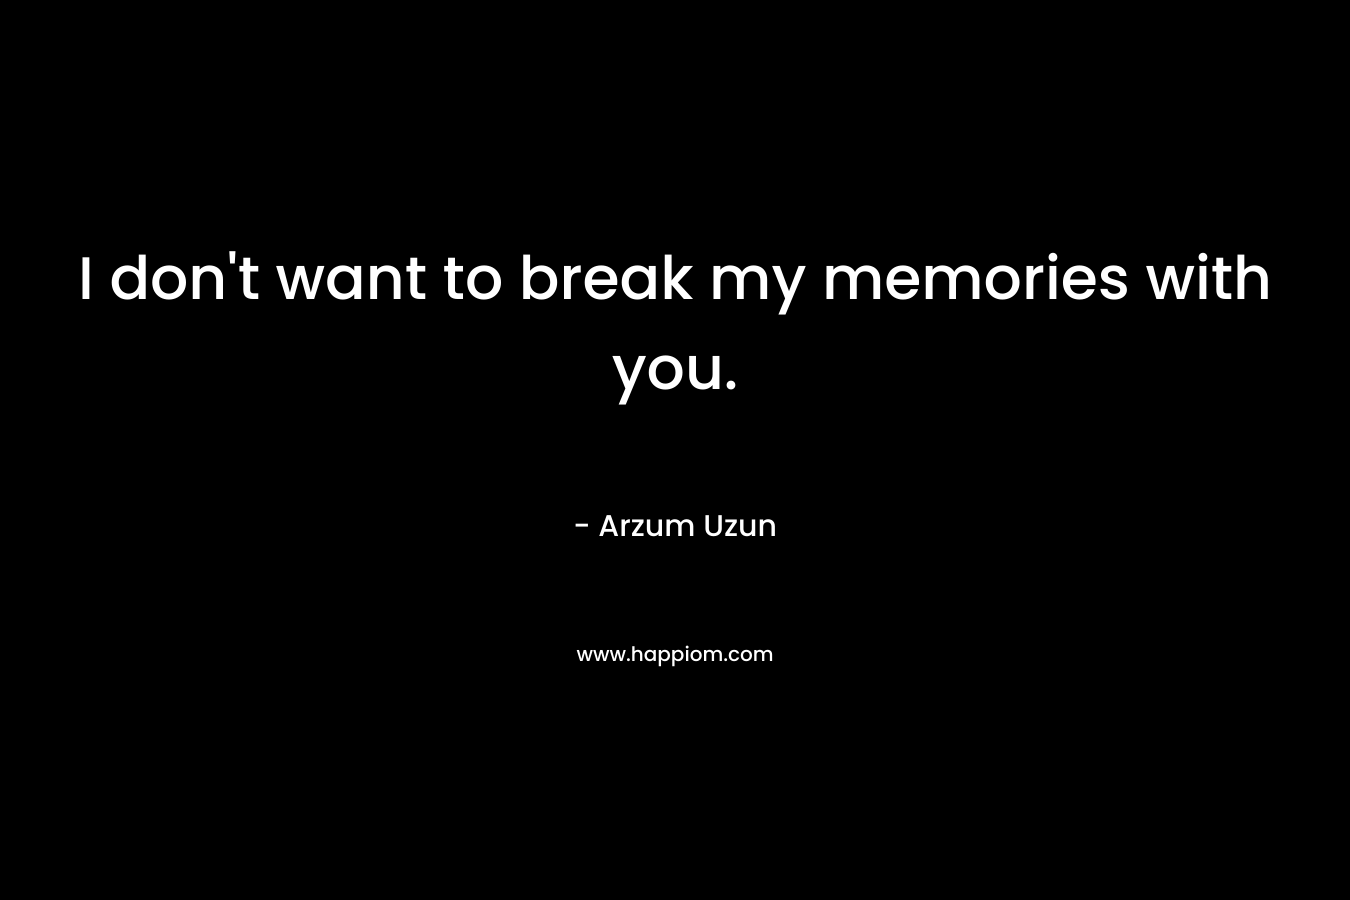 I don't want to break my memories with you.